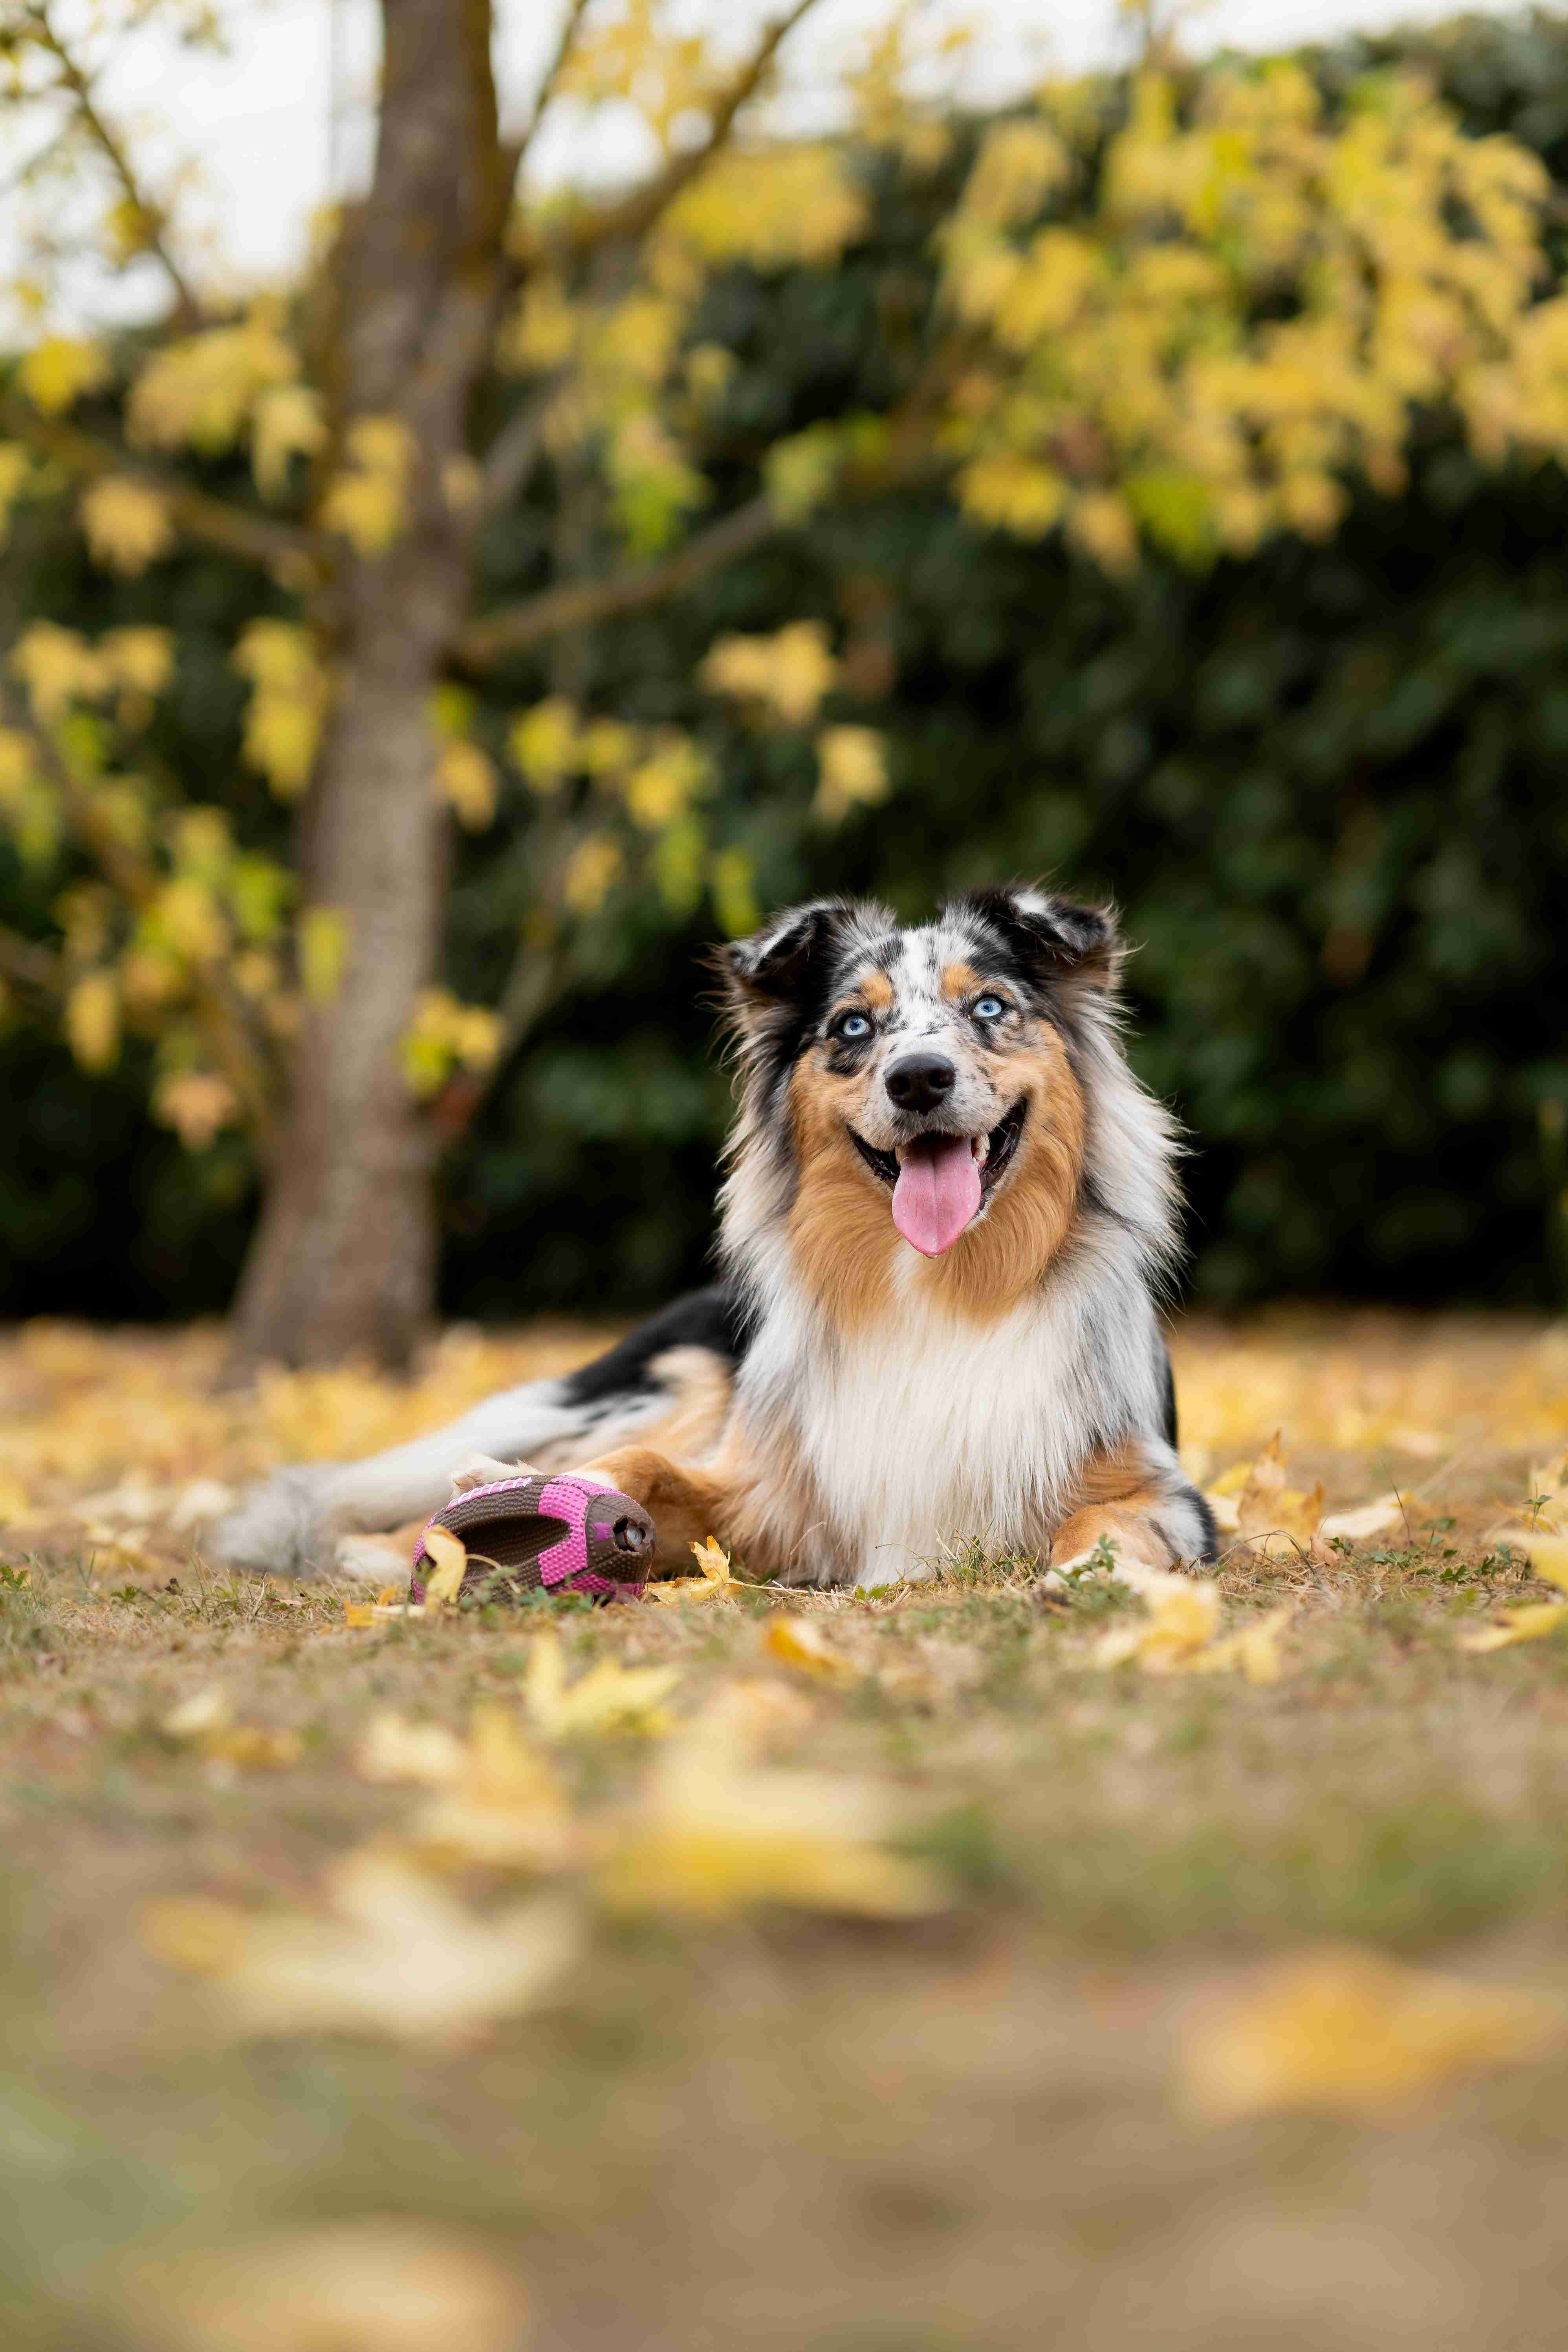 Border Collies: Which Household Fits Best - Single Owners or Families?